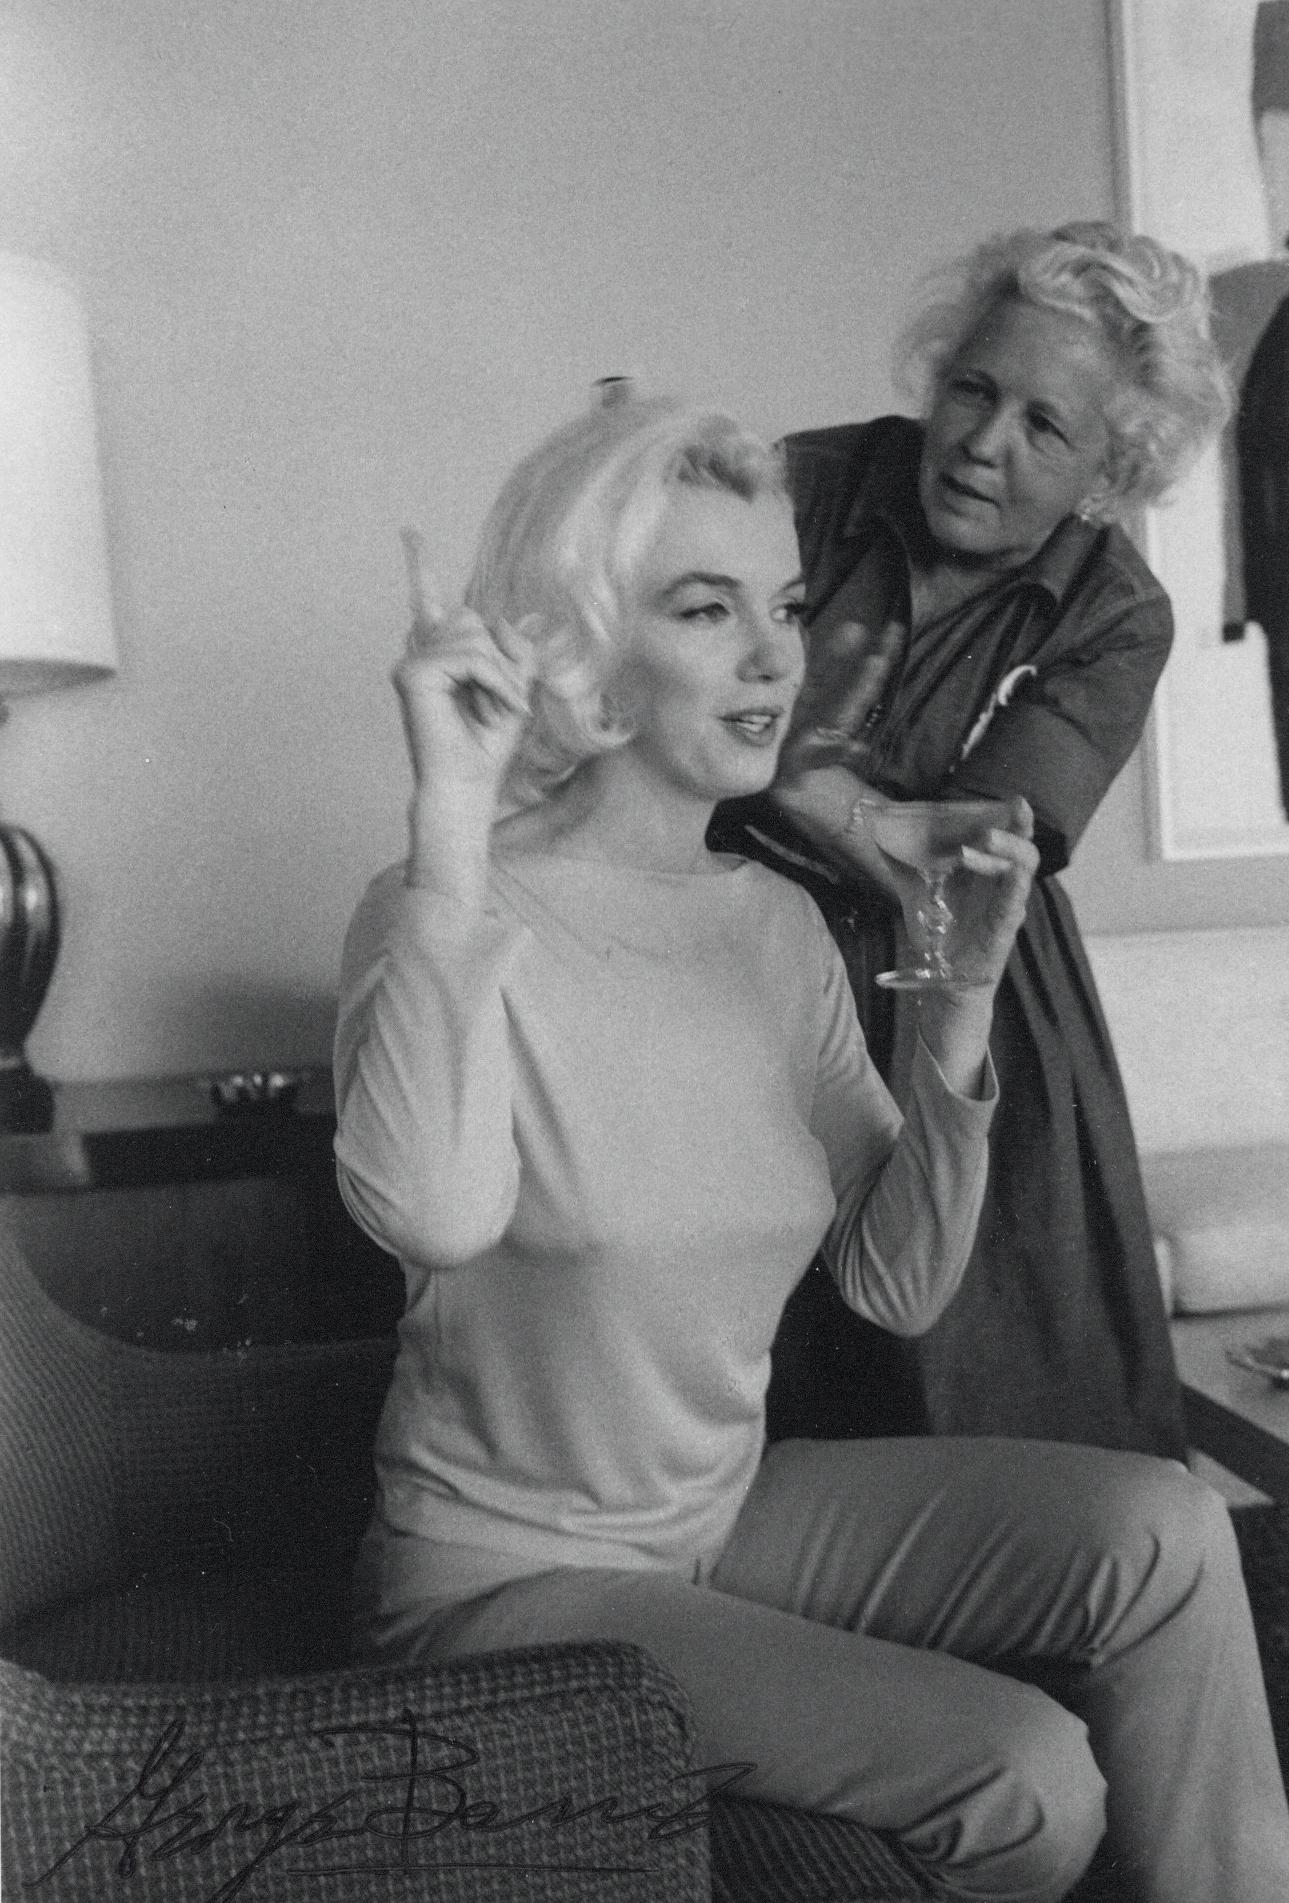 George Barris Black and White Photograph - Marilyn Monroe Candid with Hairdresser Vintage Original Photograph